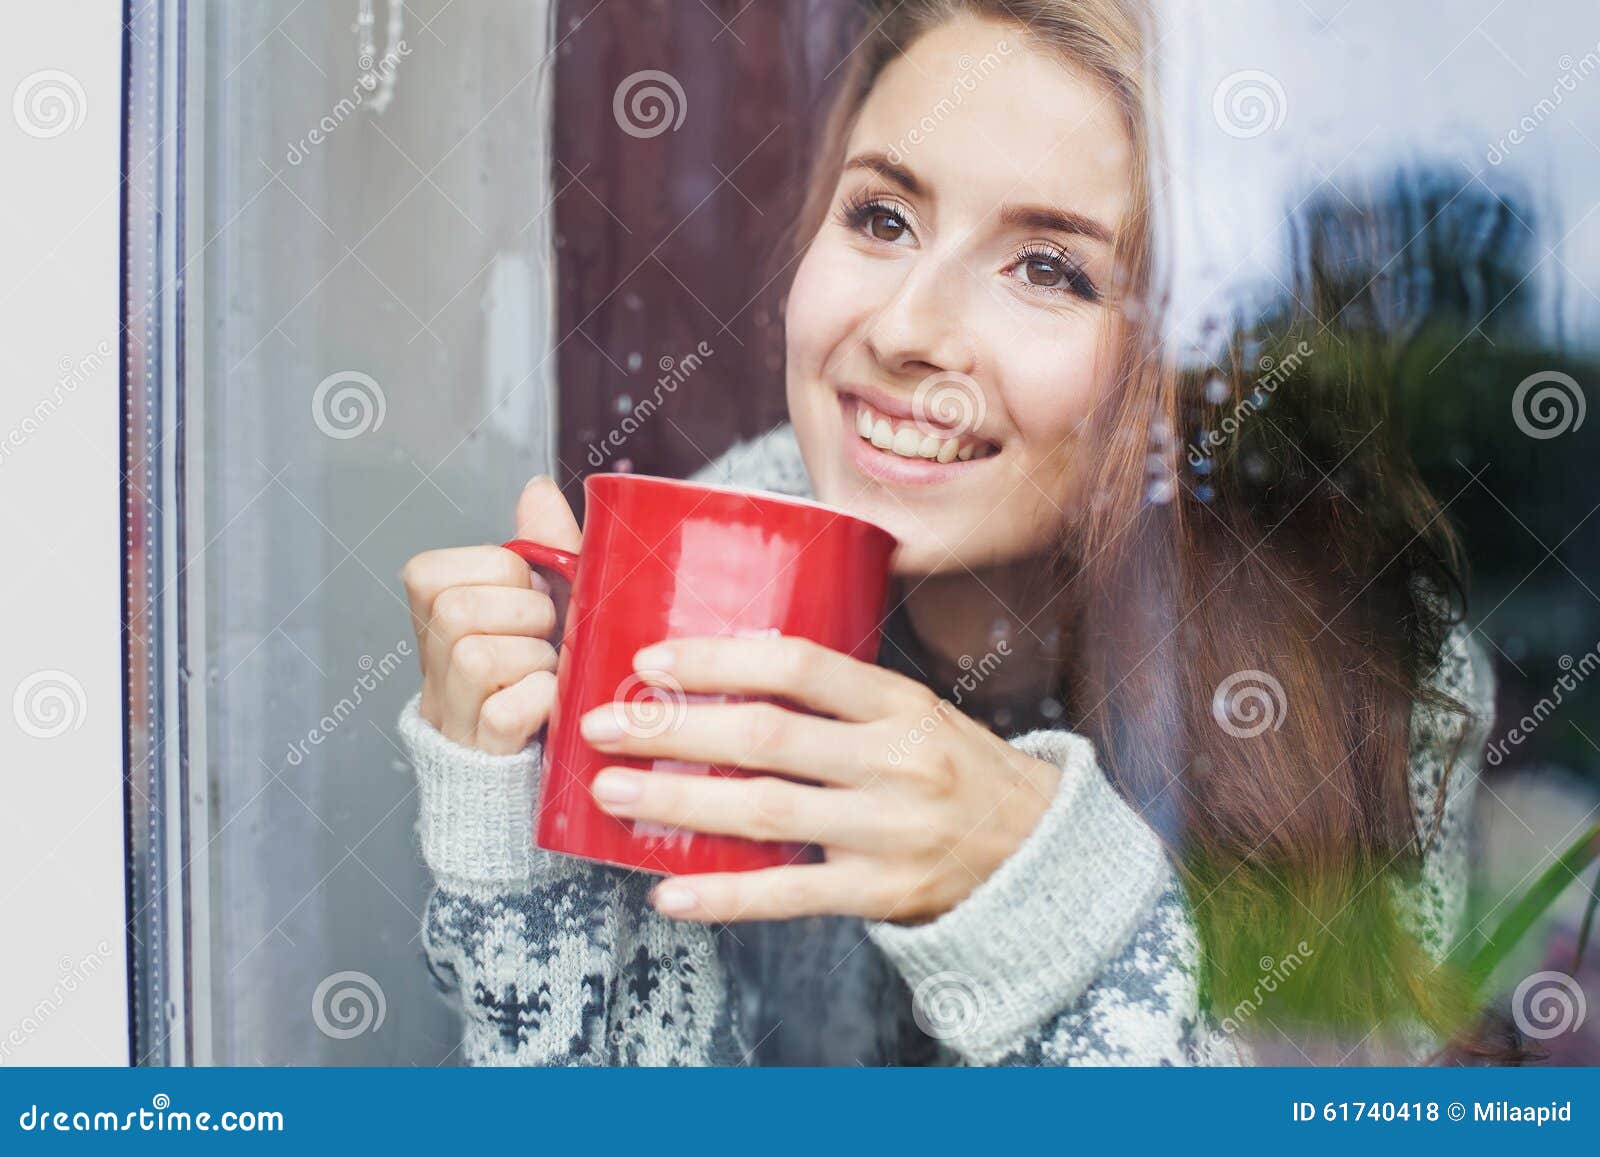 beautiful young woman on a balcony enjoing morning with cup of coffee